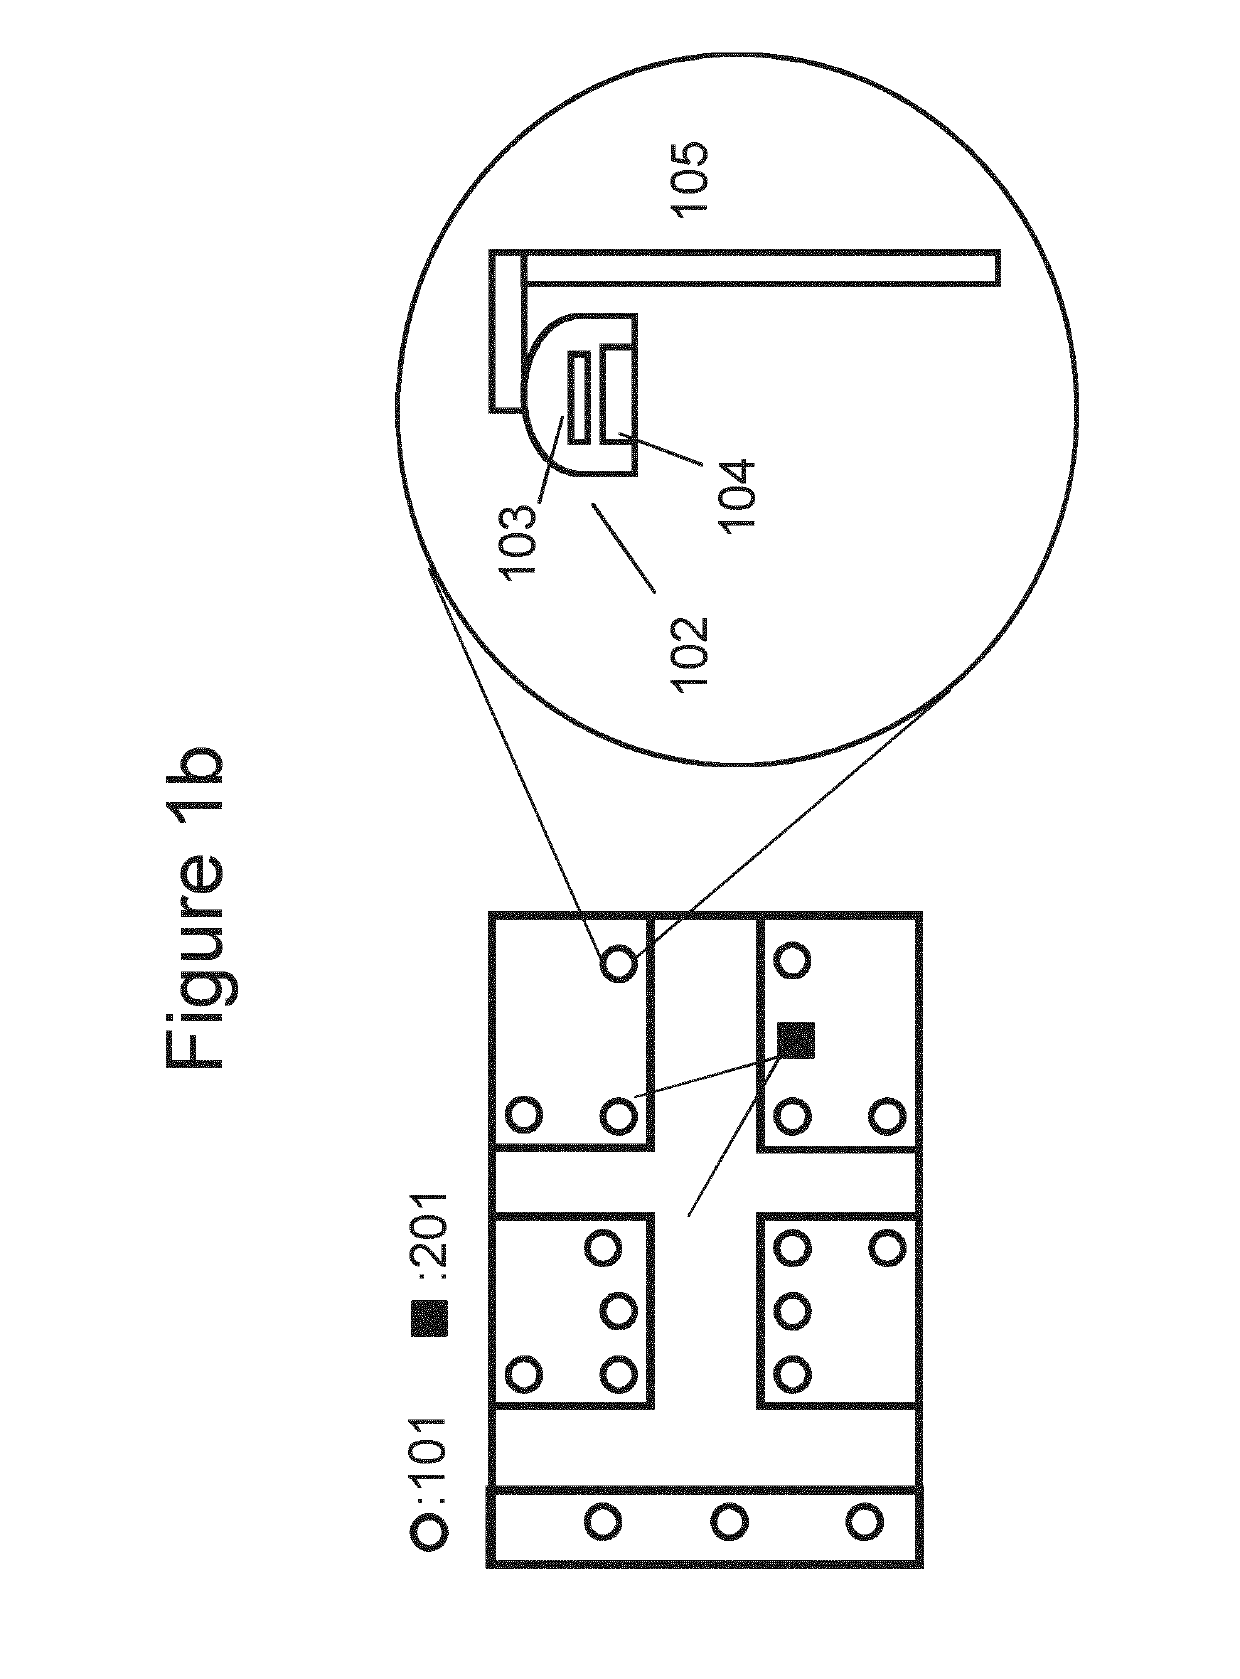 Control system for a surveillance system, surveillance system and method of controlling a surveillance system